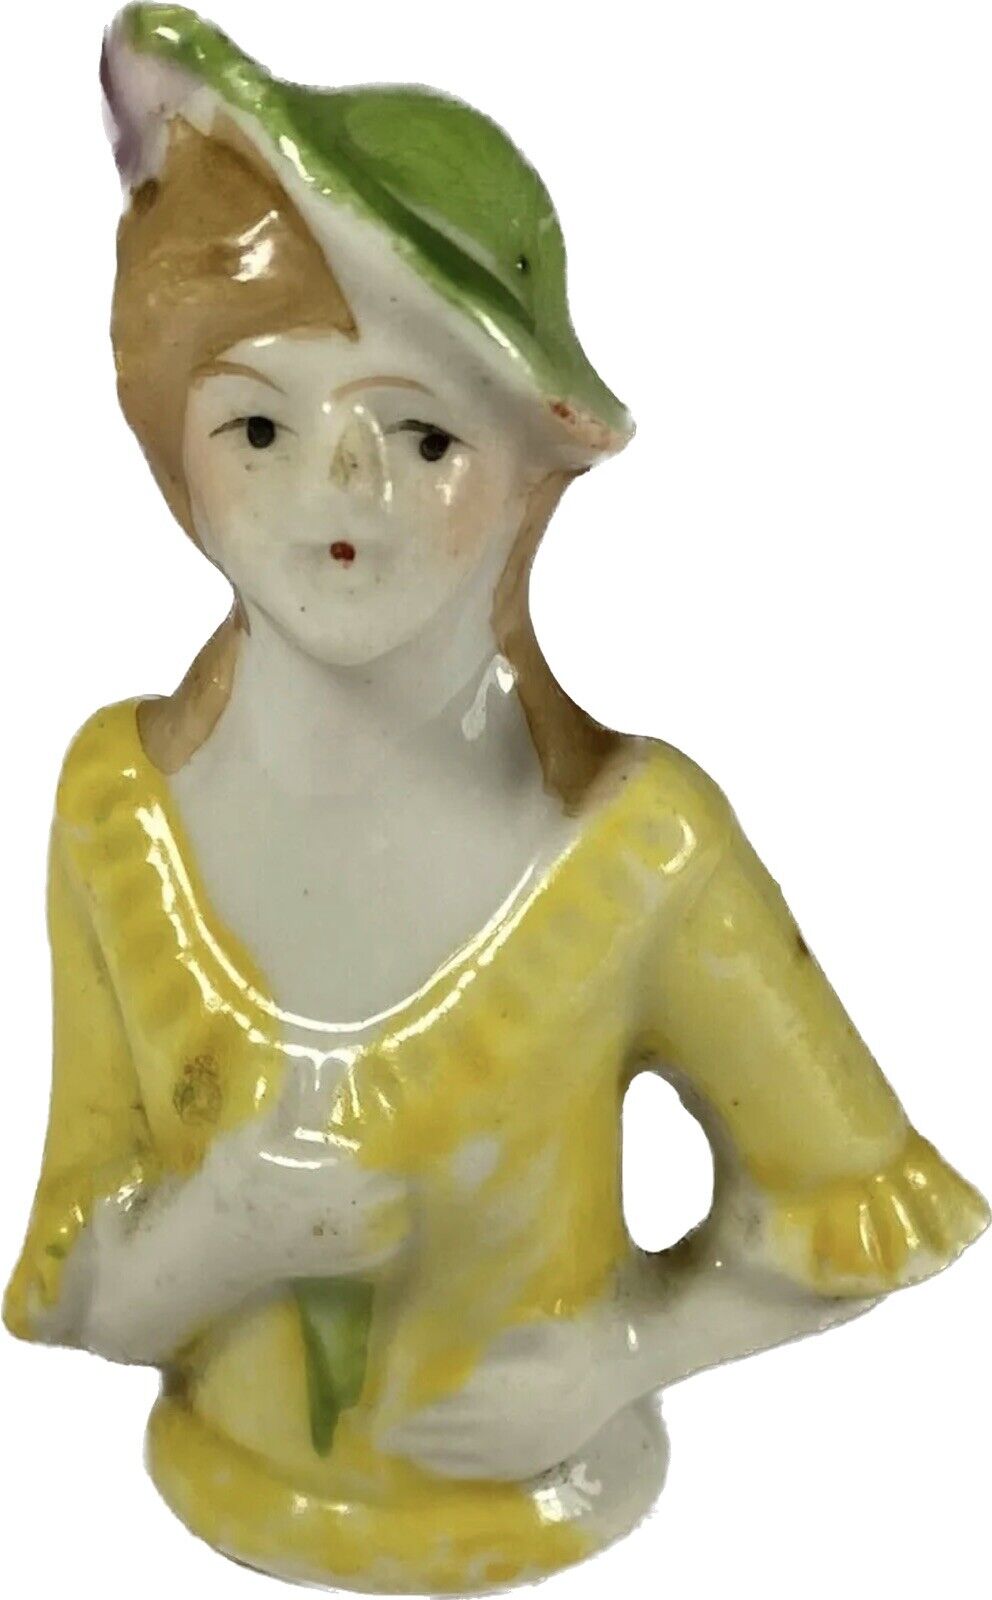 Vintage Antique Porcelain HALF DOLL – Roaring 1920’s Woman in Yellow, JAPAN 